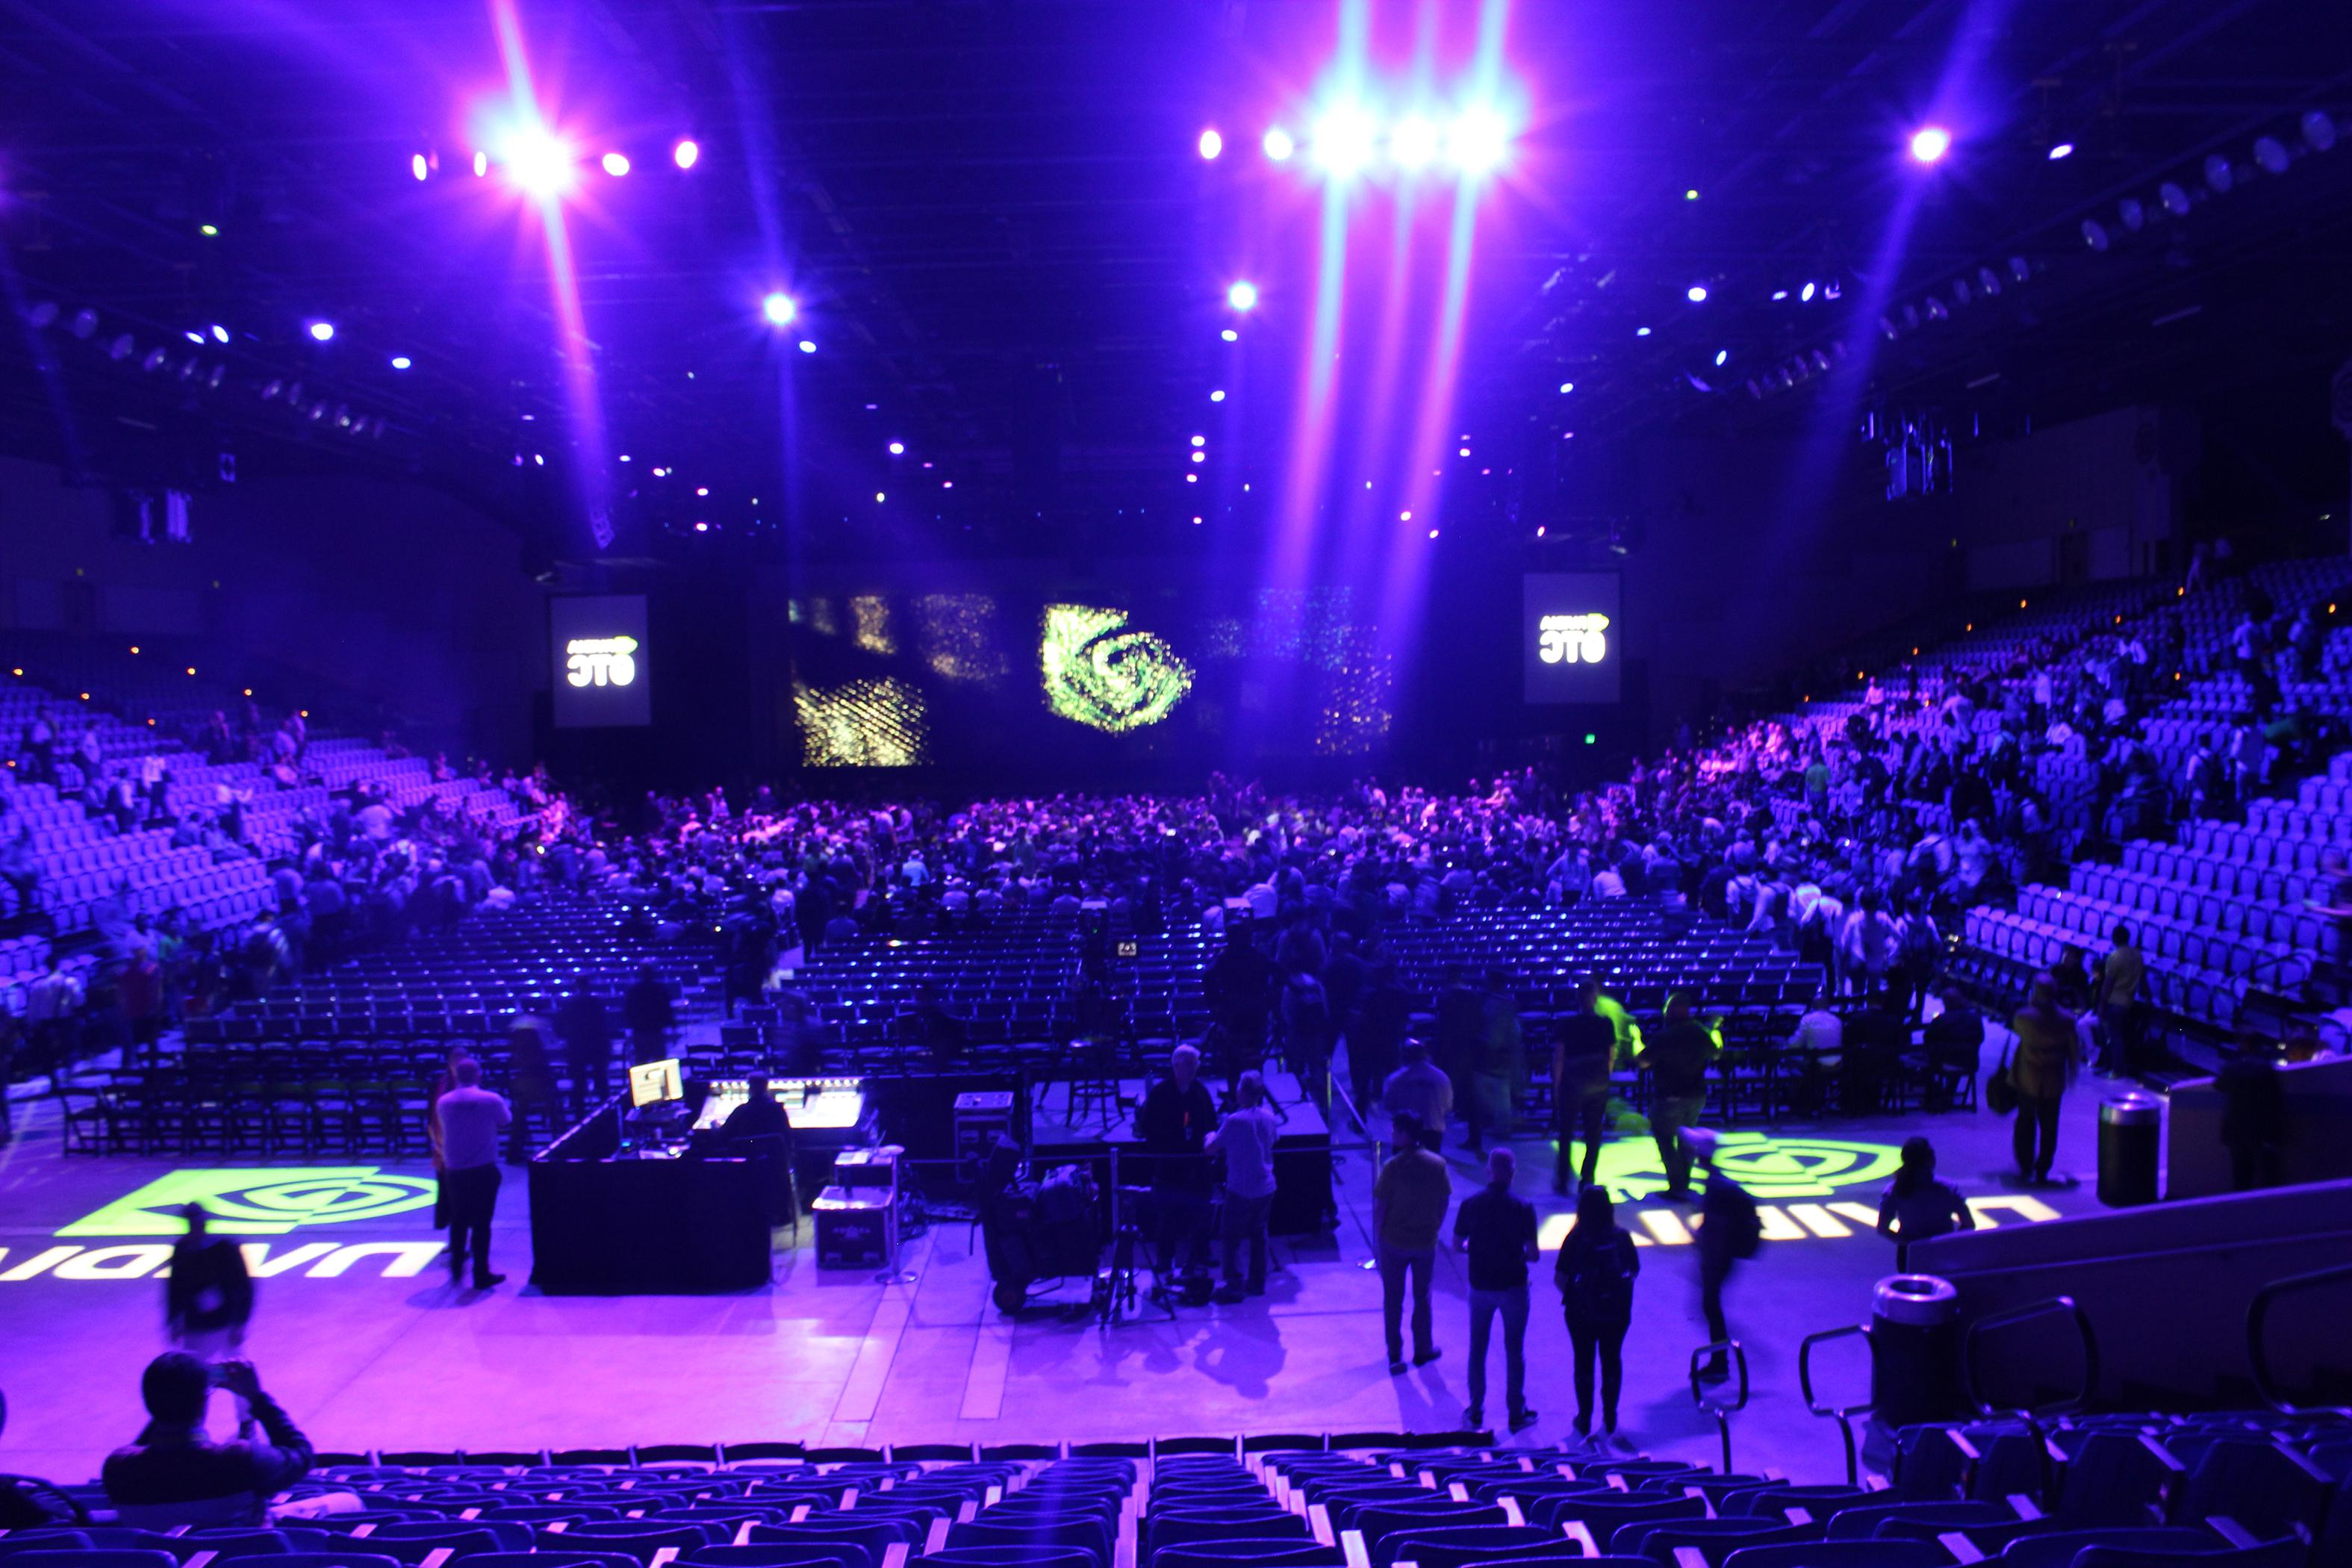 Picture of NVIDIA set up in Event Center with purple lighting and audiovisual setup.